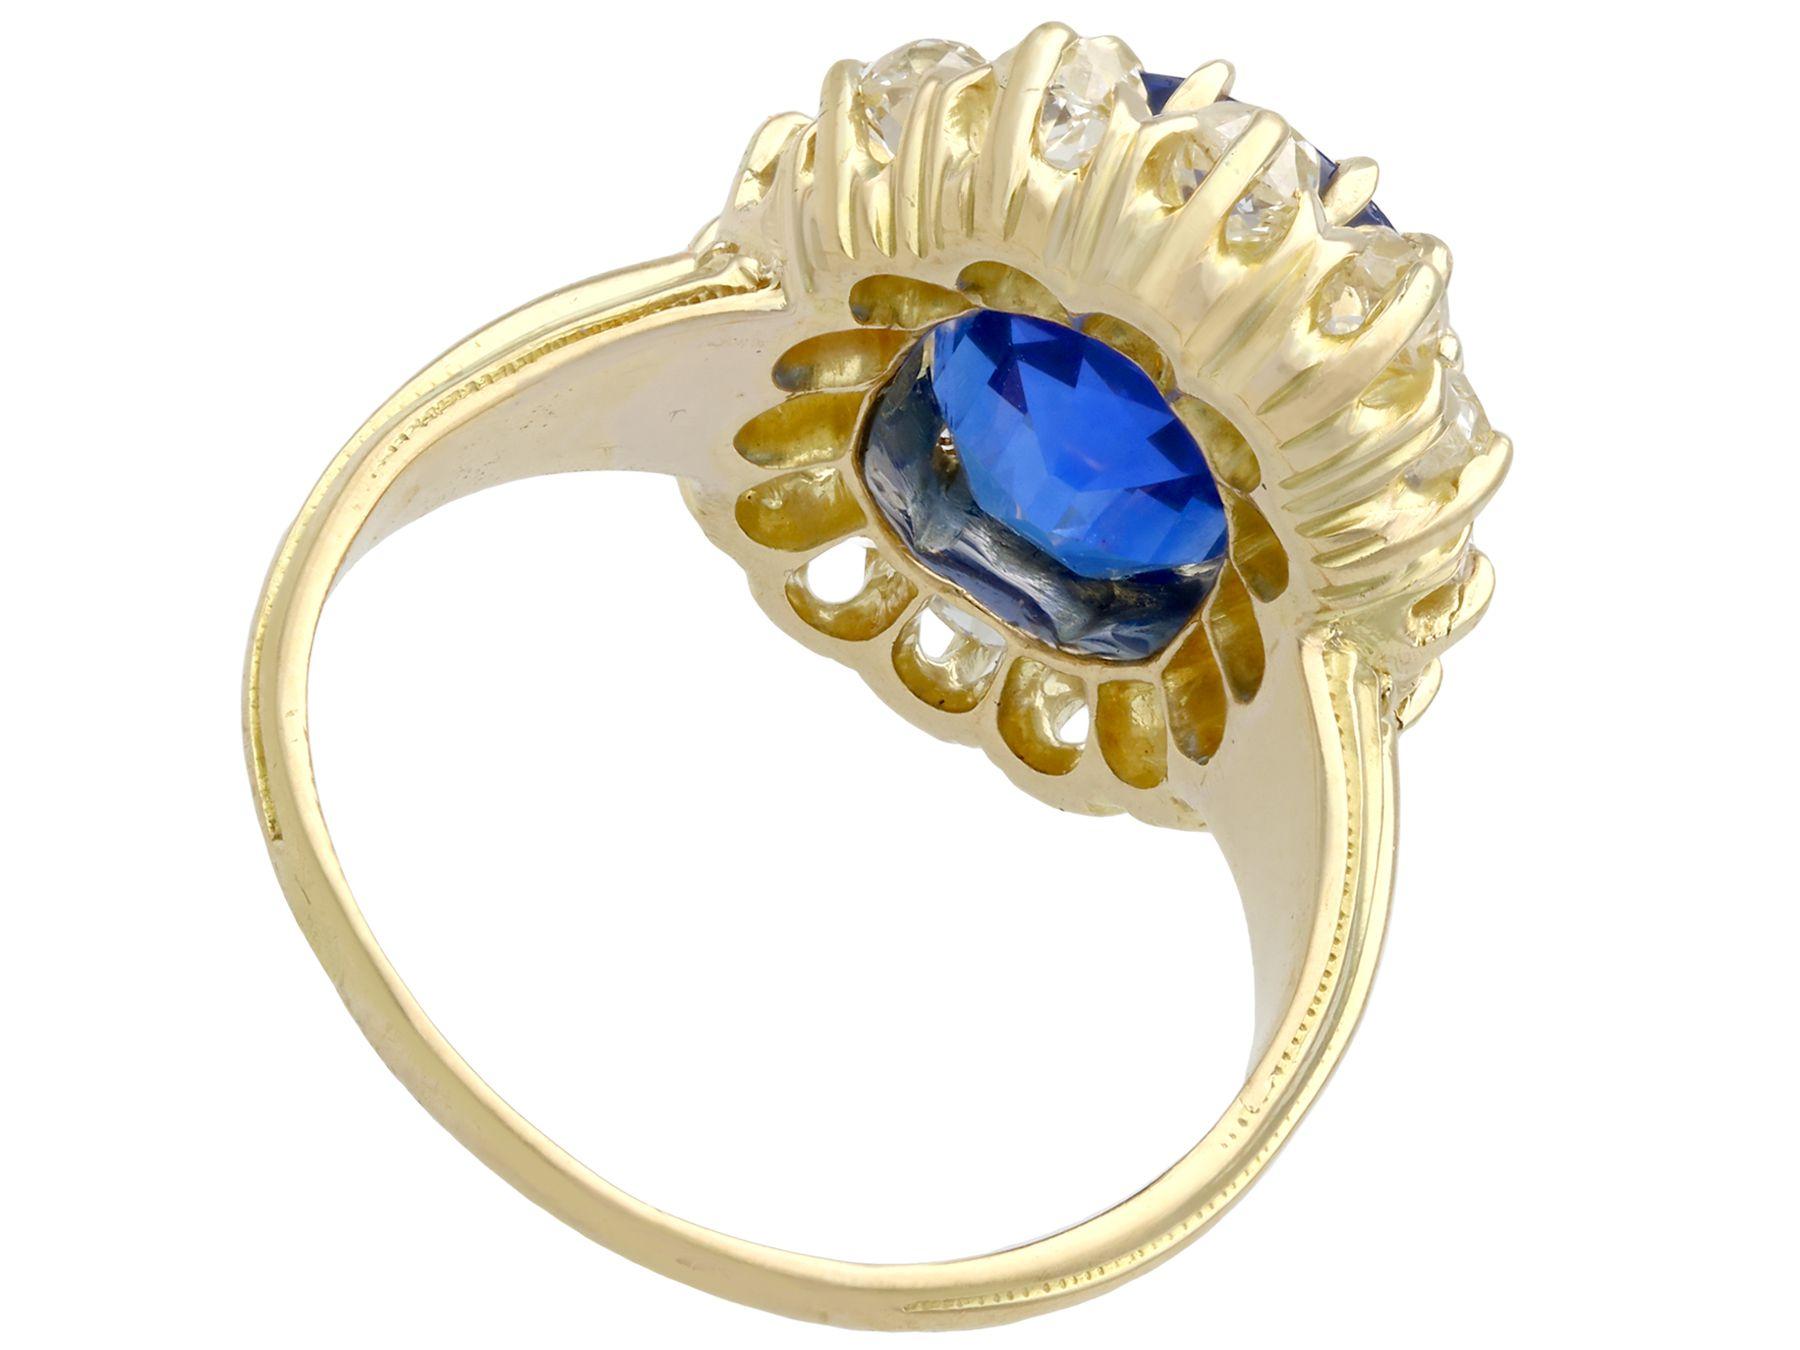 Antique French 4.81 Carat Sapphire 1.26 Carat Diamond Yellow Gold Cluster Ring In Excellent Condition For Sale In Jesmond, Newcastle Upon Tyne